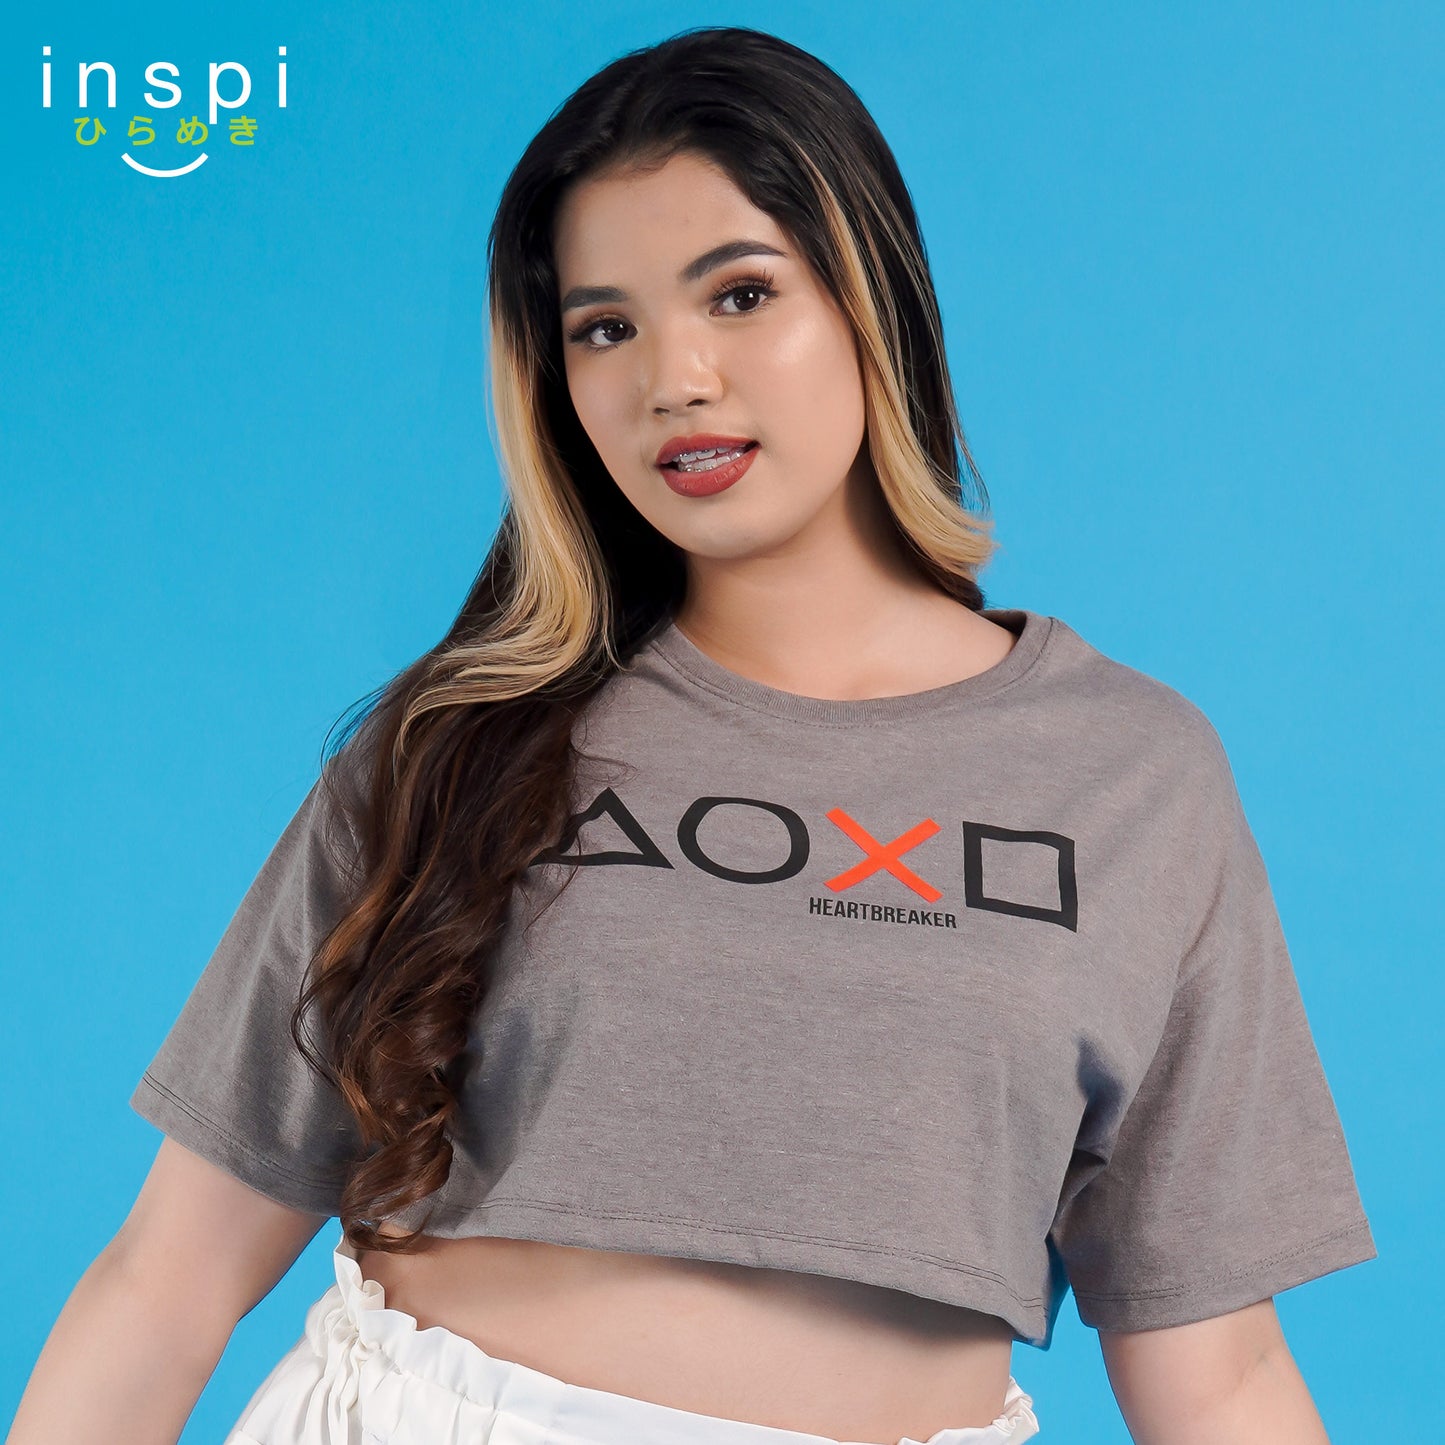 INSPI Oversized Crop Top Playstation Graphic Tshirt